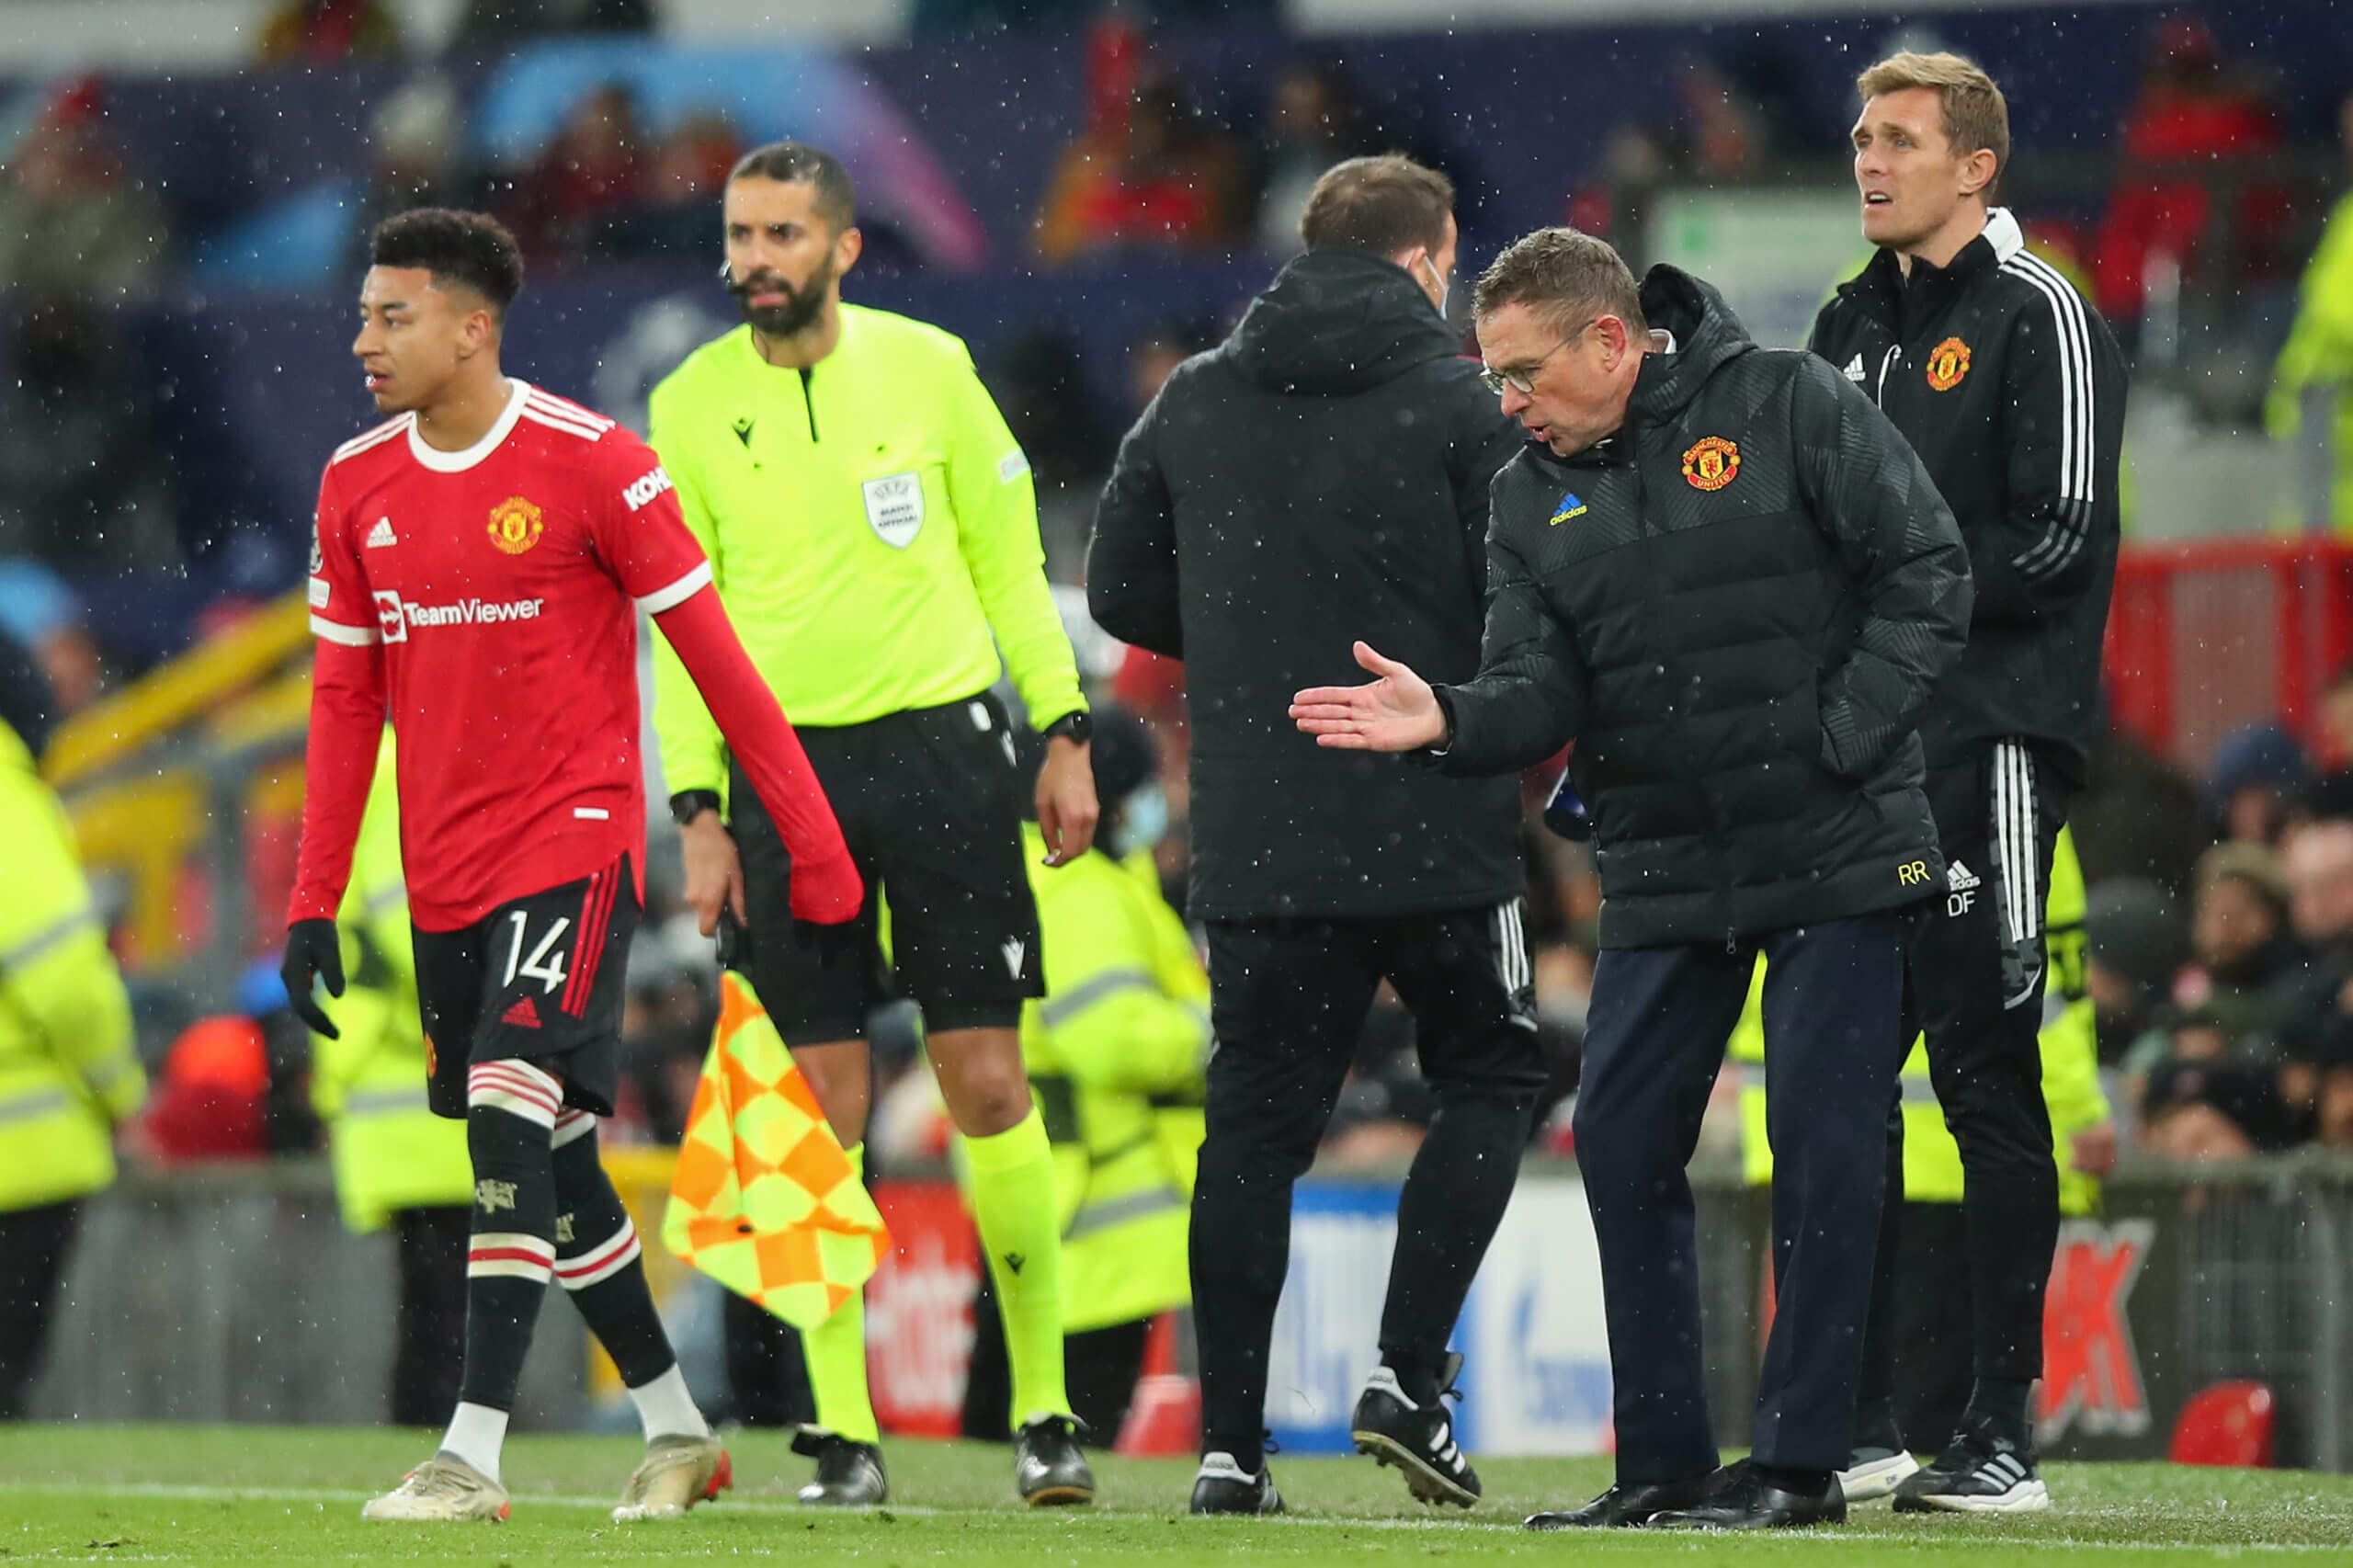 Ralf Rangnick had promised regular firs-team game time to Jesse Lingard